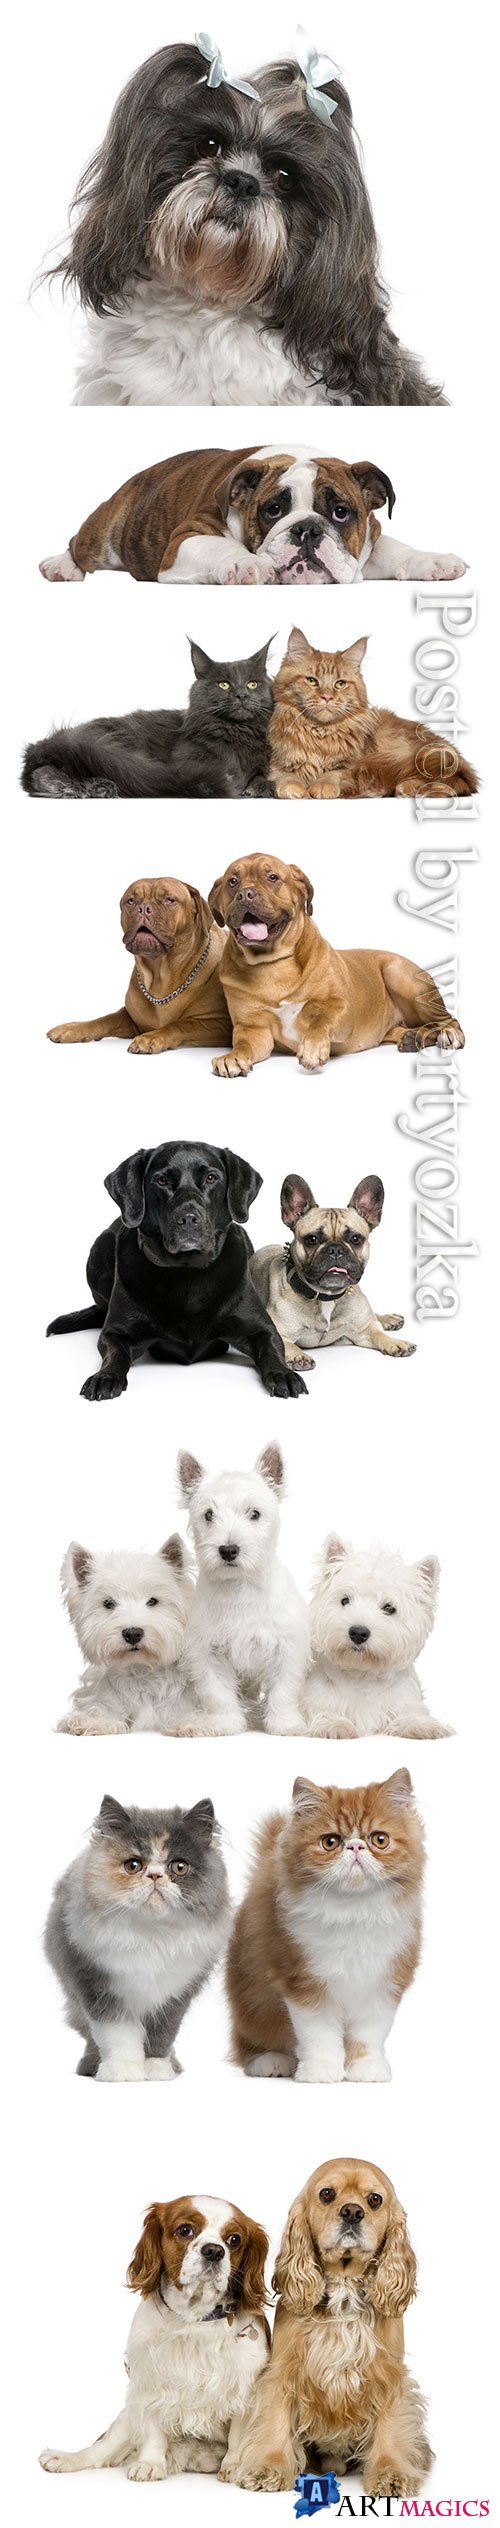 Purebred cats and dogs